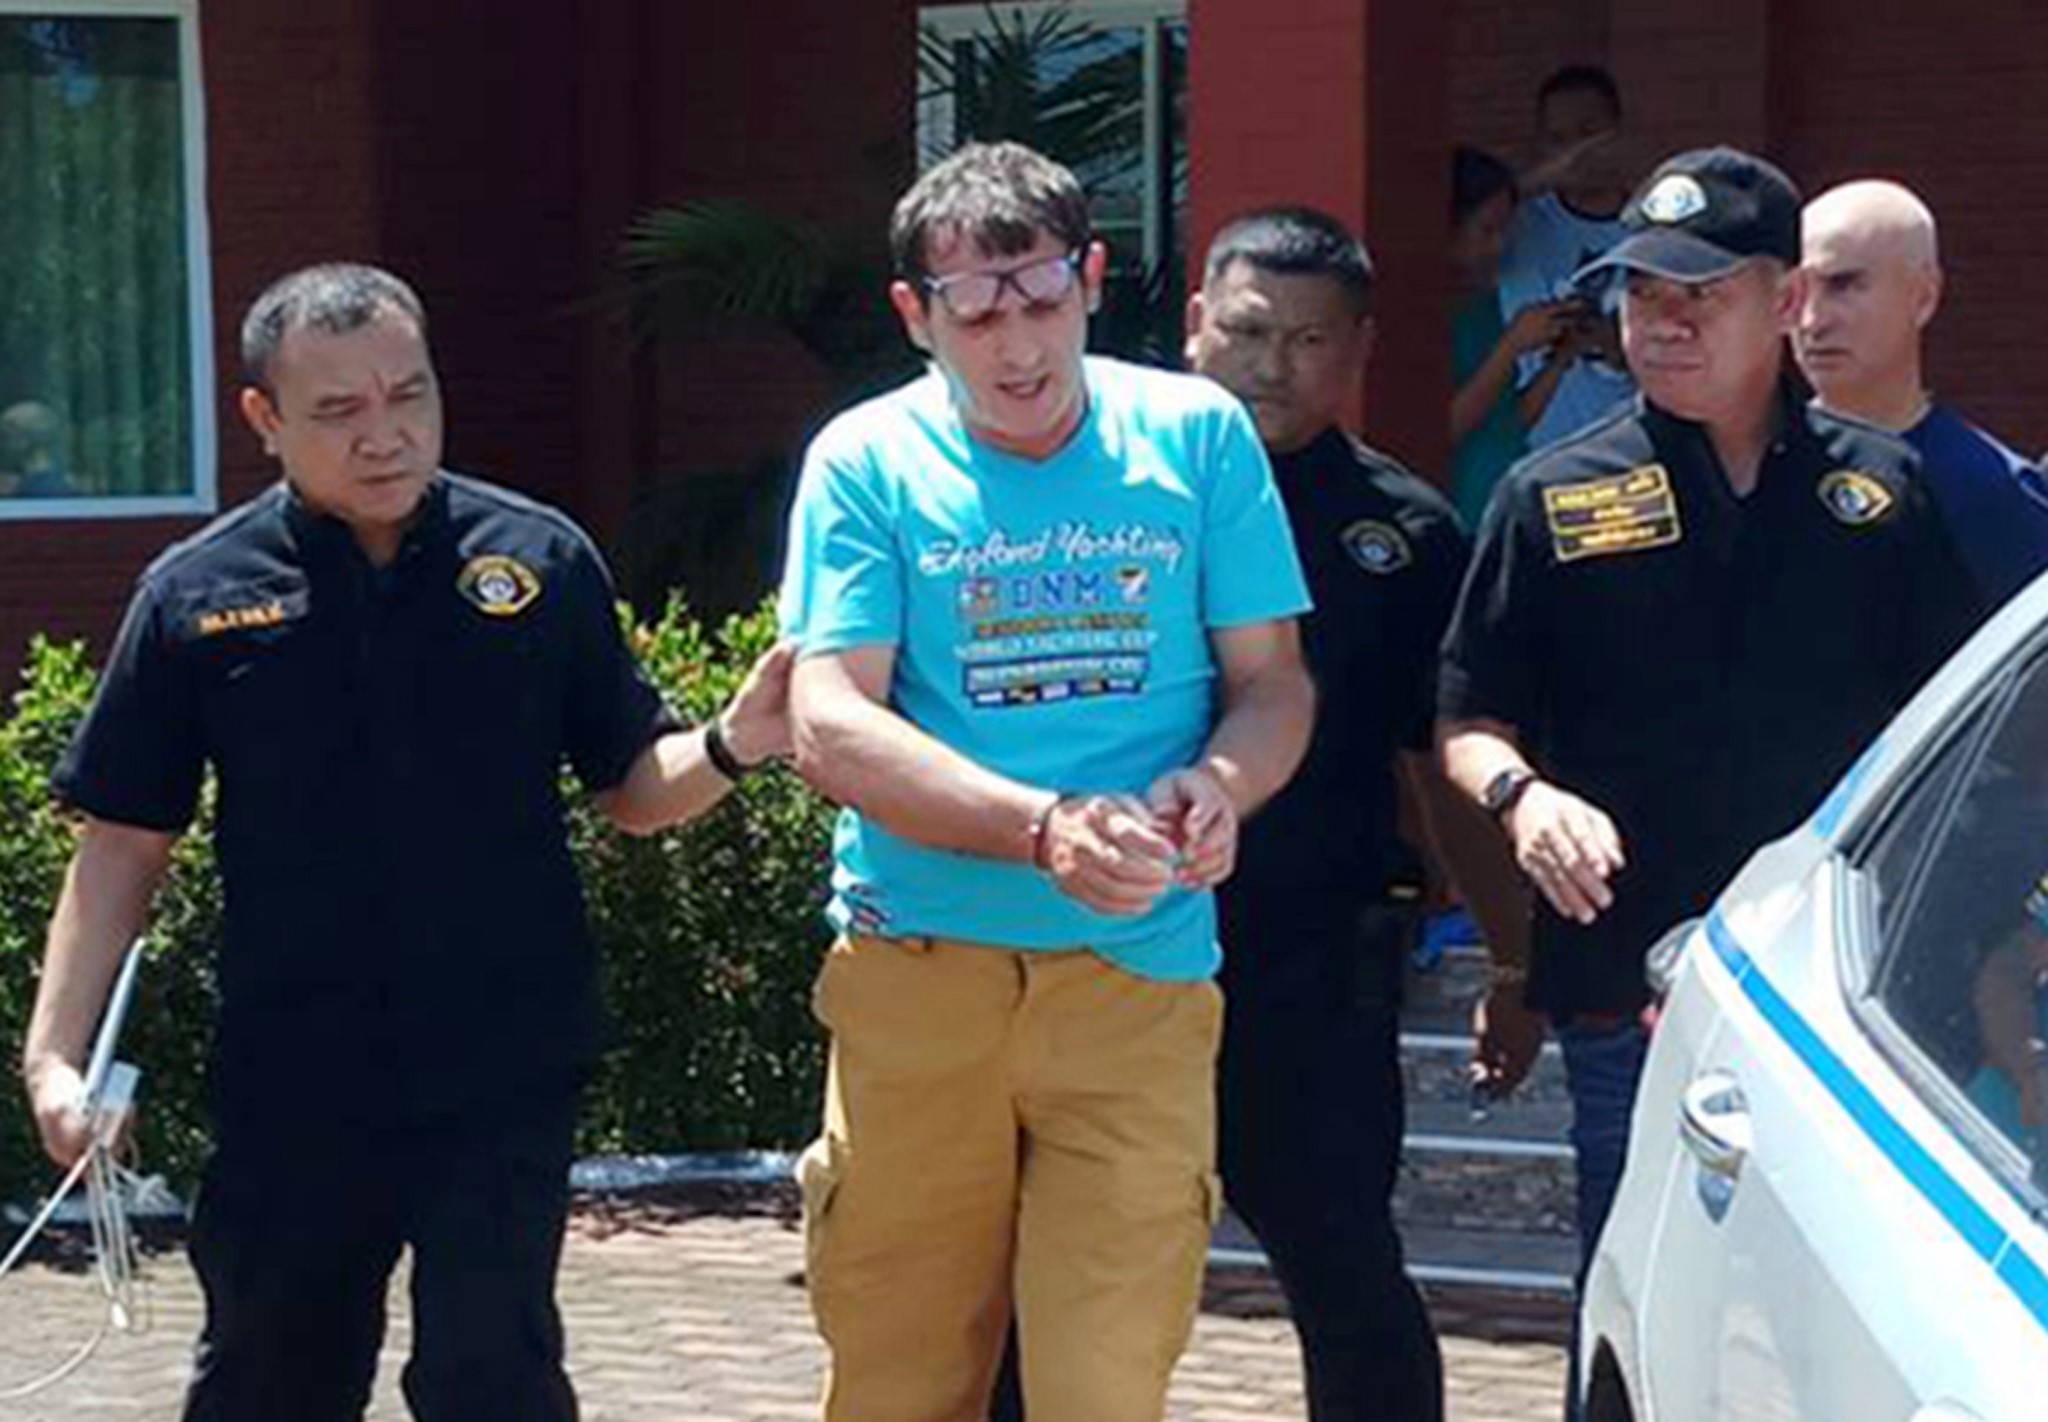 epa07653427 A handout photo made available by the Crime Suppression Division of the Royal Thai Police shows Thai police officers arresting Italian fraudster crime suspected Francesco Galdelli (C) at a house on the outskirts of Pattaya resort city, Chonburi province, Thailand, 15 June 2019 (issued 17 June 2019). Thai police arrested an Italian couple, a man identified as Francesco Galdelli and a woman Vanja Goffi as they wanted on an interpol notice after fleeing a jail sentence in Italy, accused of fraudulently using the name of US Hollywood actor George Clooney to scam people to invest in a bogus clothing company.  EPA/CRIME SUPPRESSION DIVISION/ROYAL THAI POLICE HANDOUT -- BEST QUALITY AVAILABLE -- HANDOUT EDITORIAL USE ONLY/NO SALES